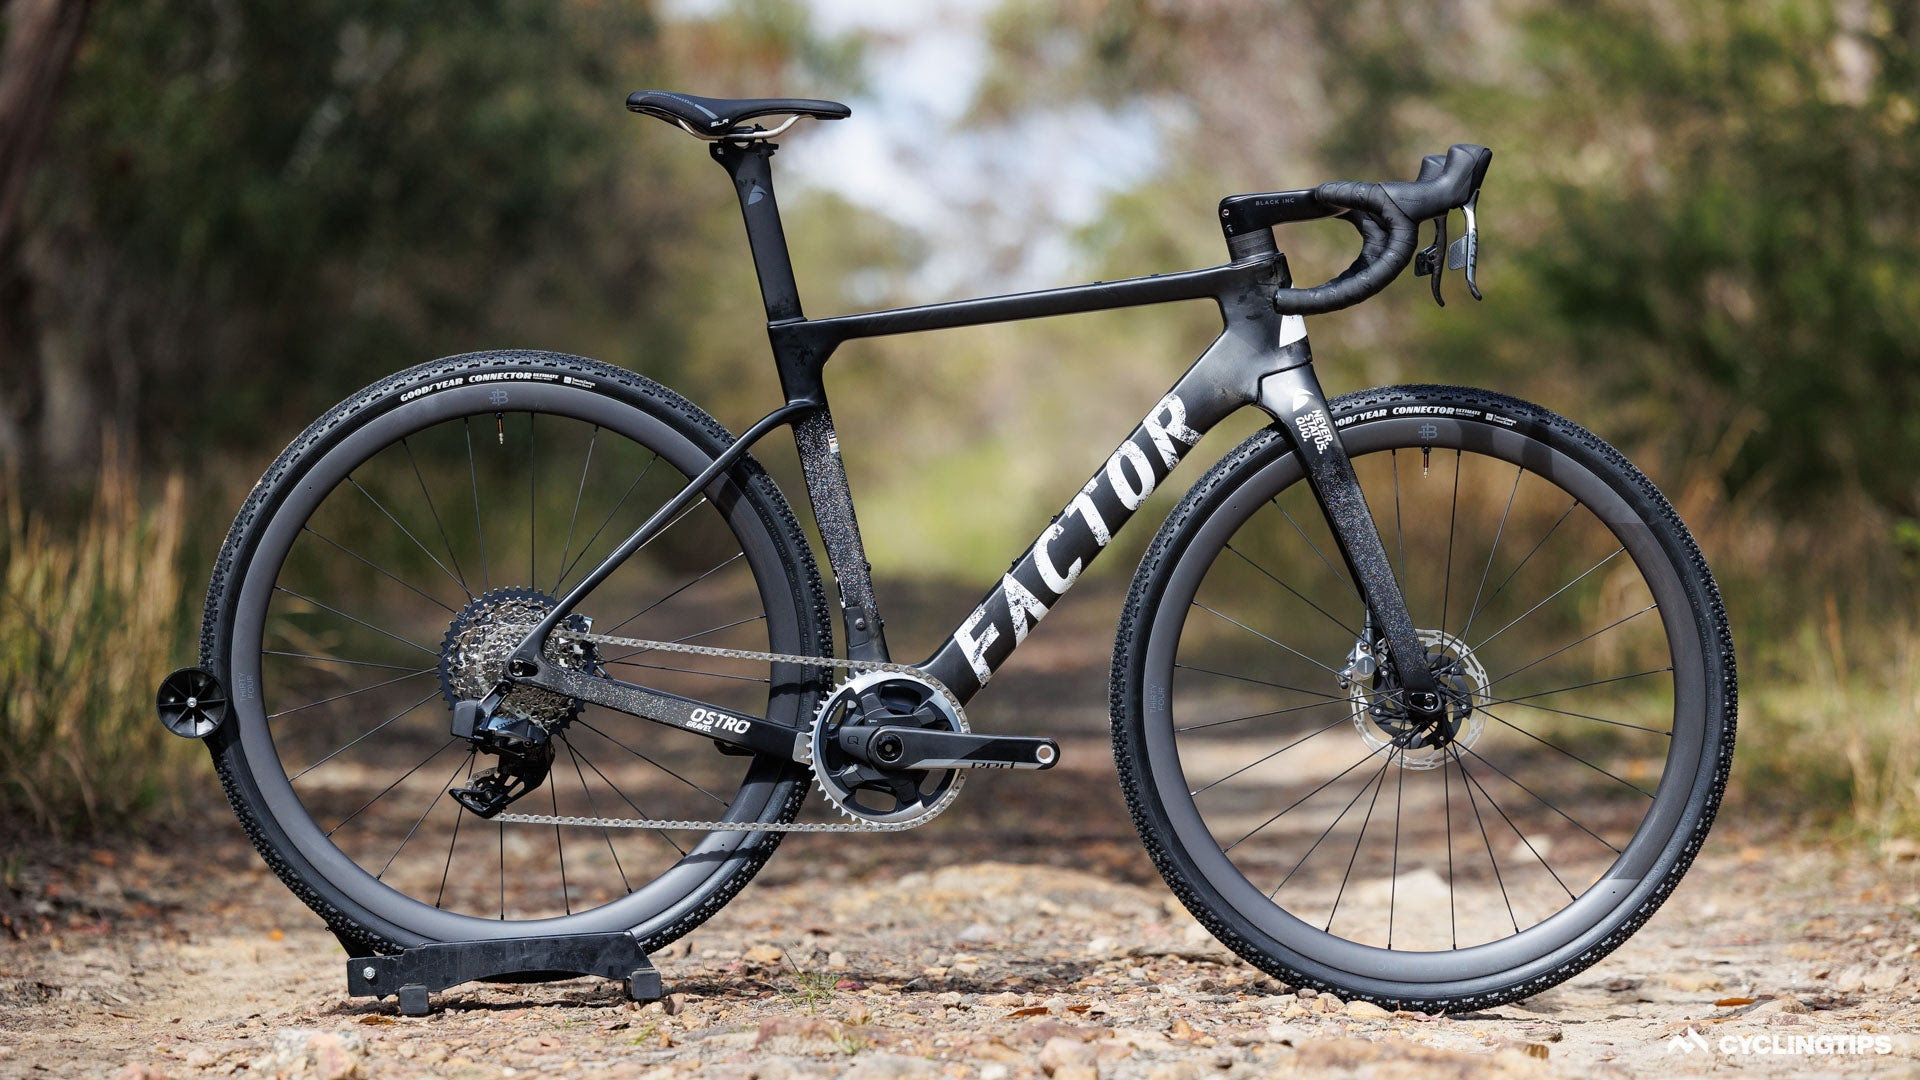 Factor Ostro Gravel review: unapologetically made for racing